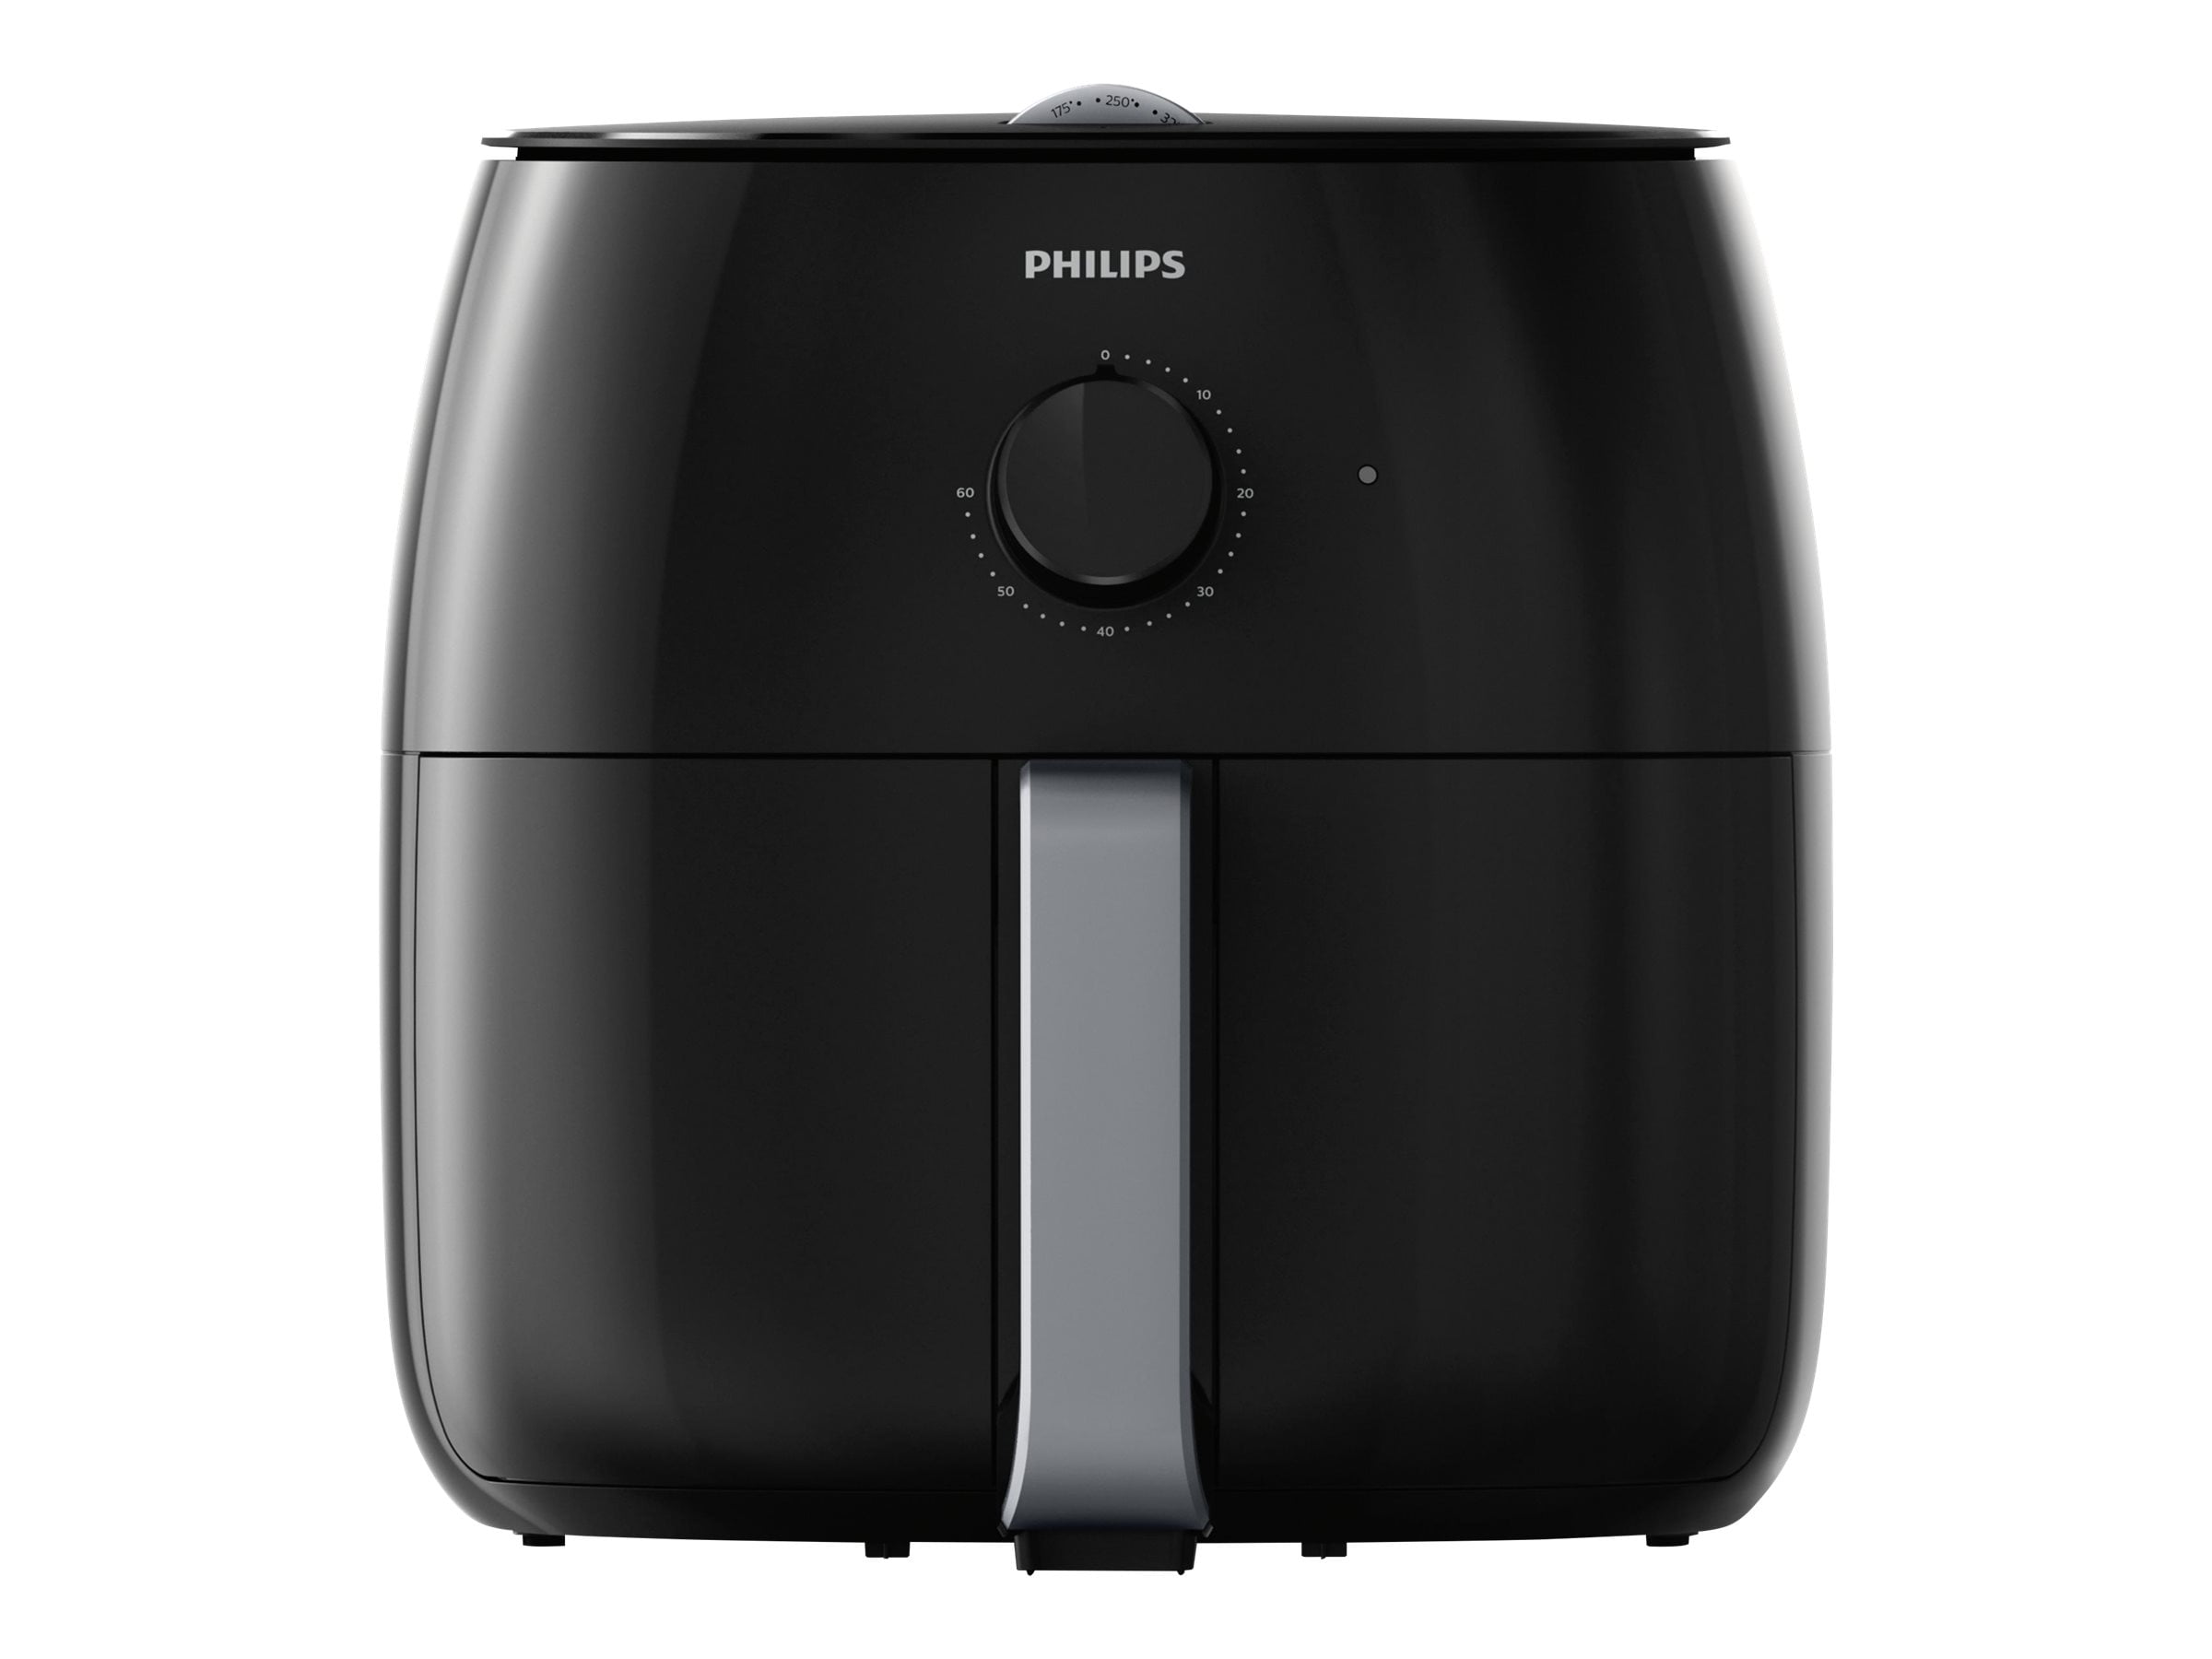 Best Buy: Philips Viva Collection Digital Air Fryer White/Silver